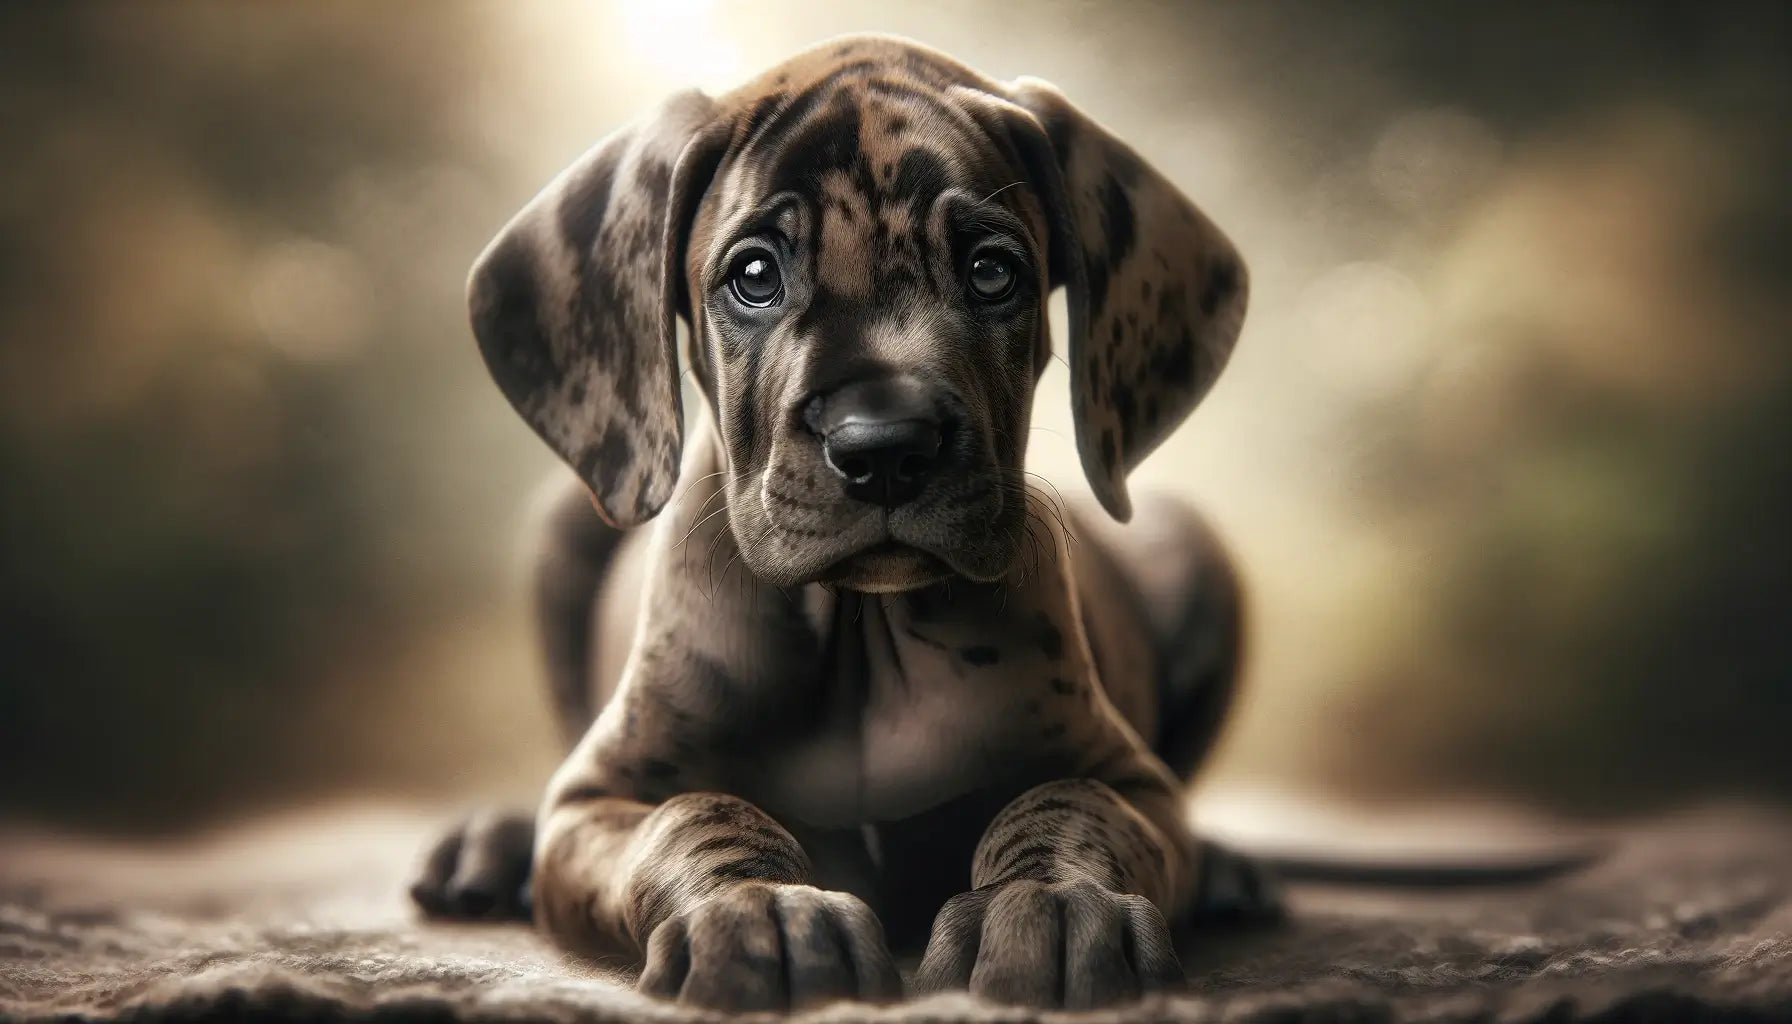 Brindle Great Dane puppy highlighting its youthful features such as small size, floppy ears, and captivating eyes.